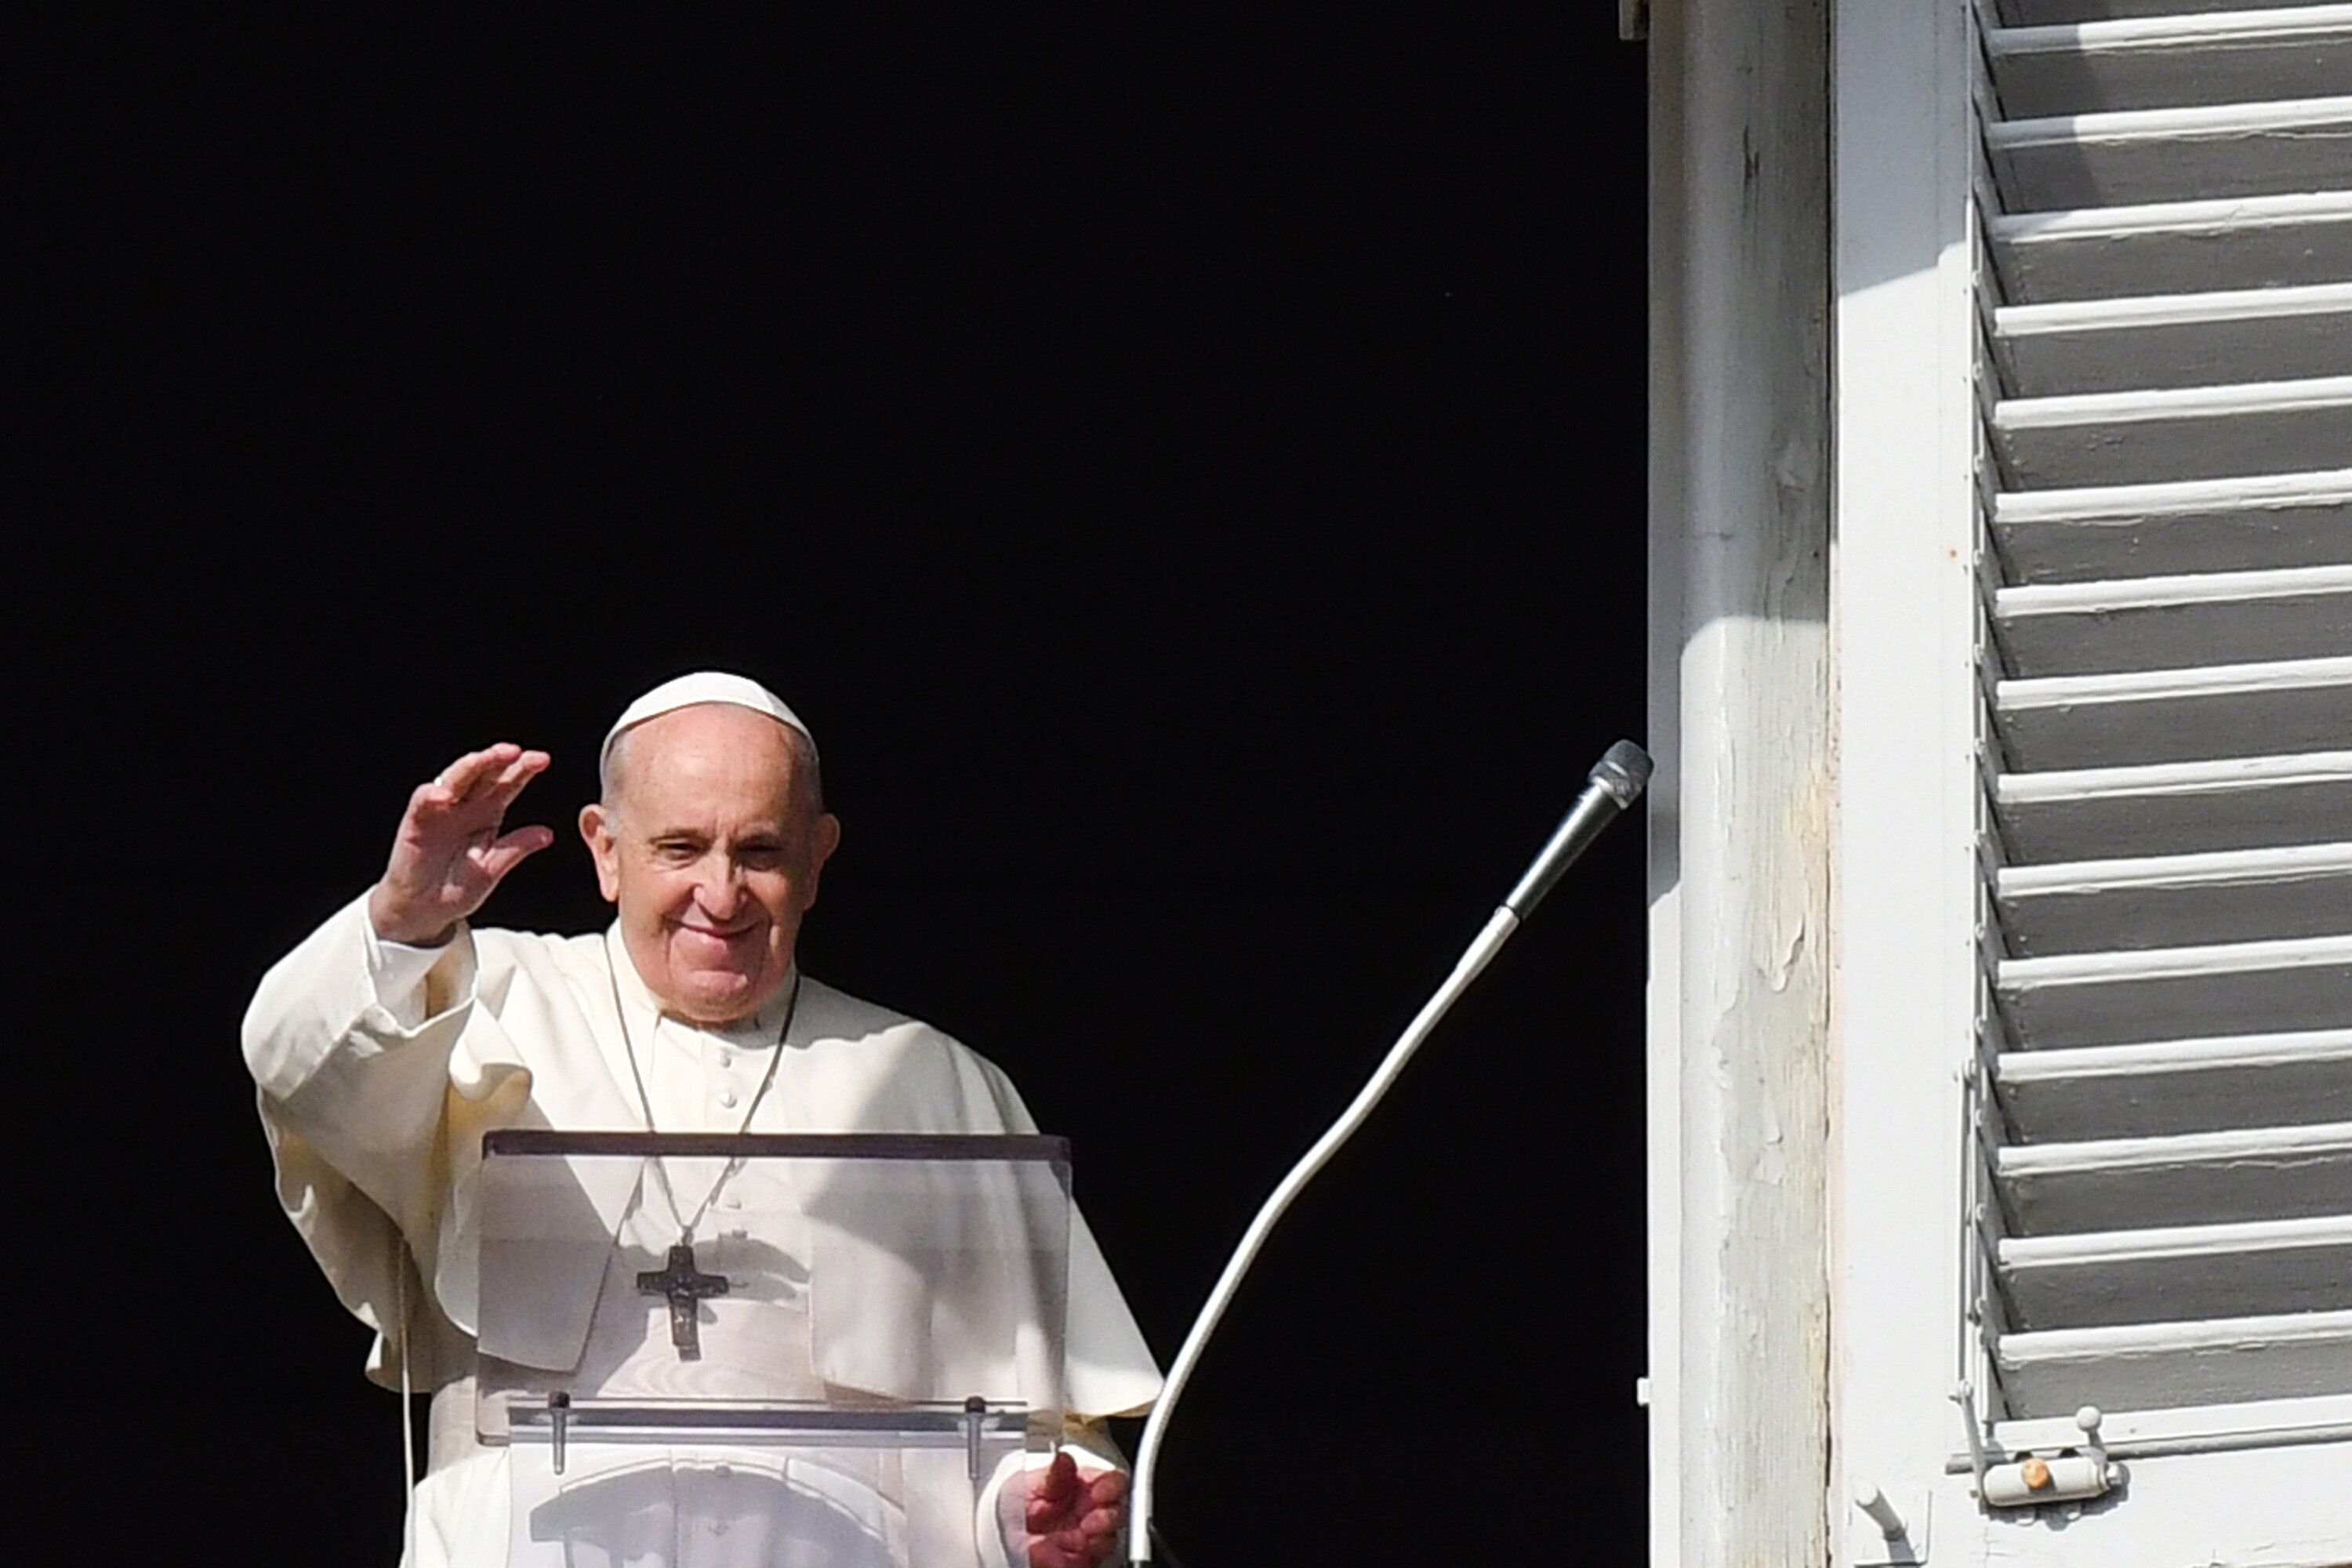 Pope Francis waves as he addresses the crowd from a window overlooking St Peter's Square during his weekly Angelus prayer at 